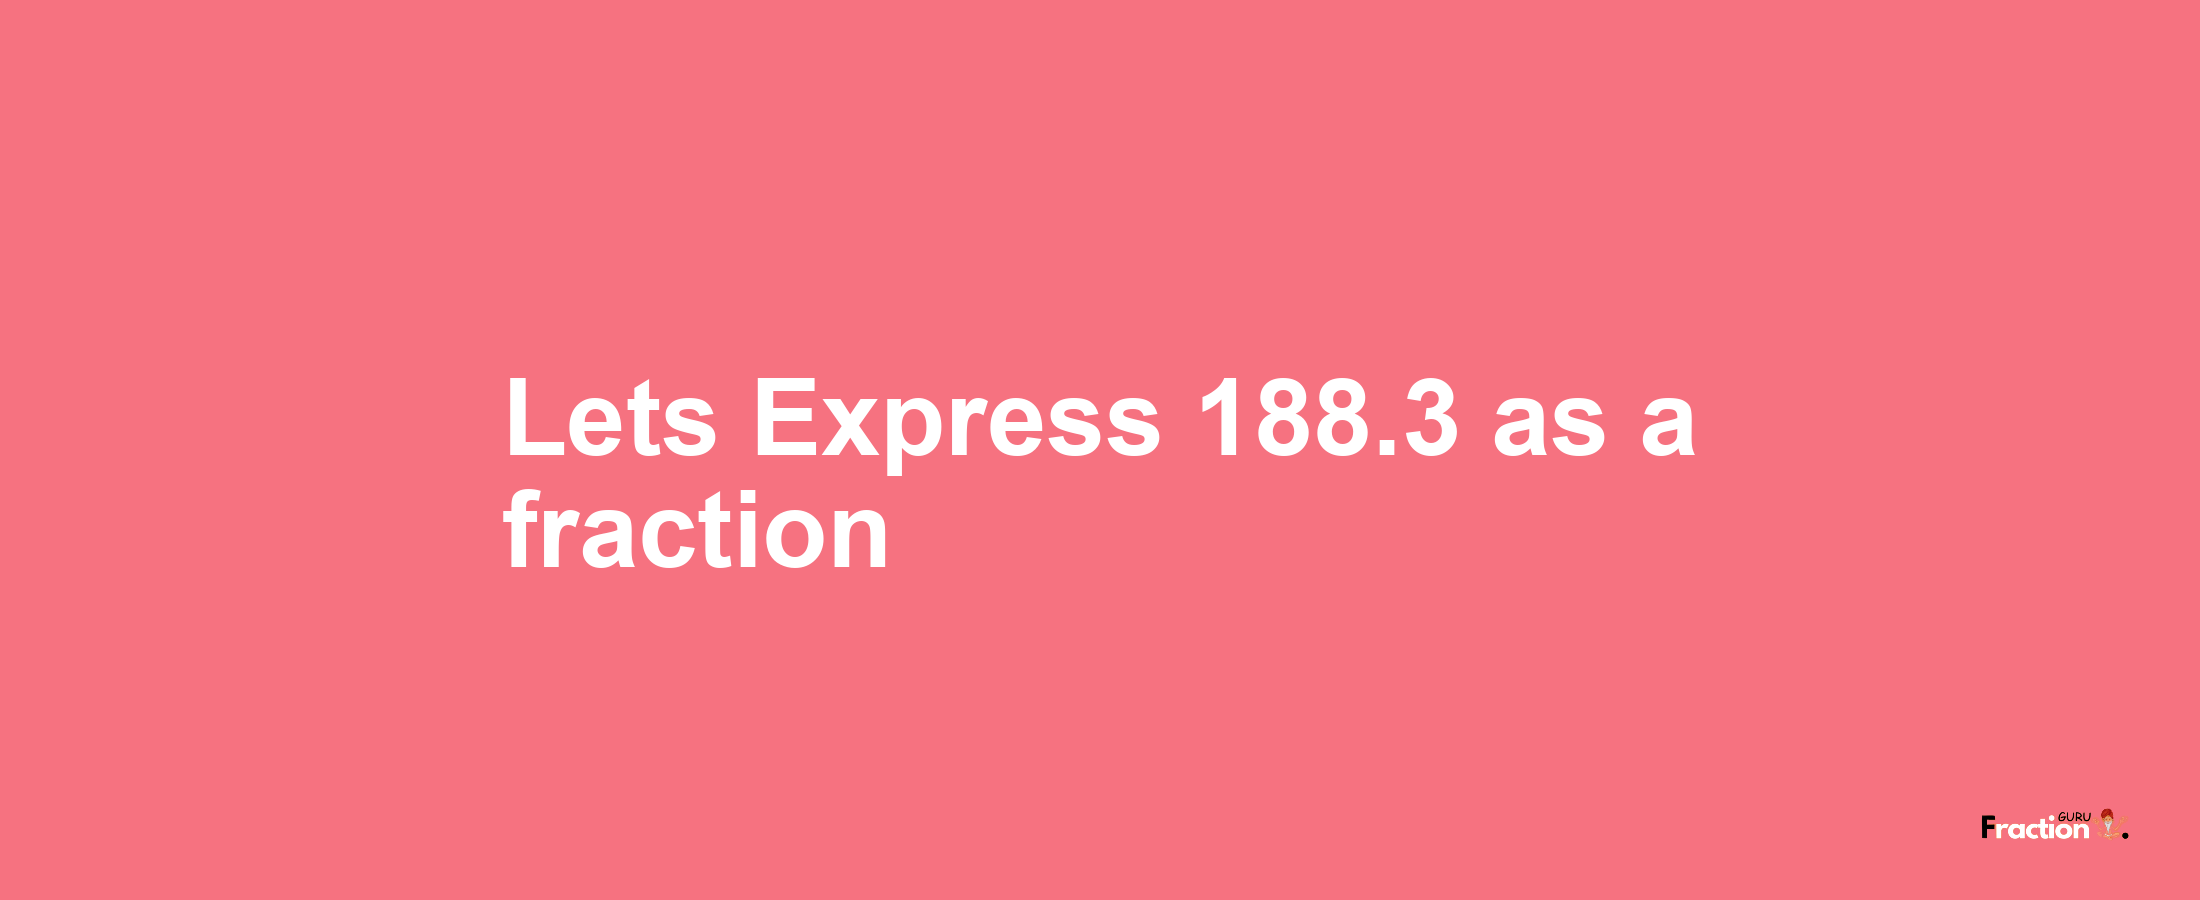 Lets Express 188.3 as afraction